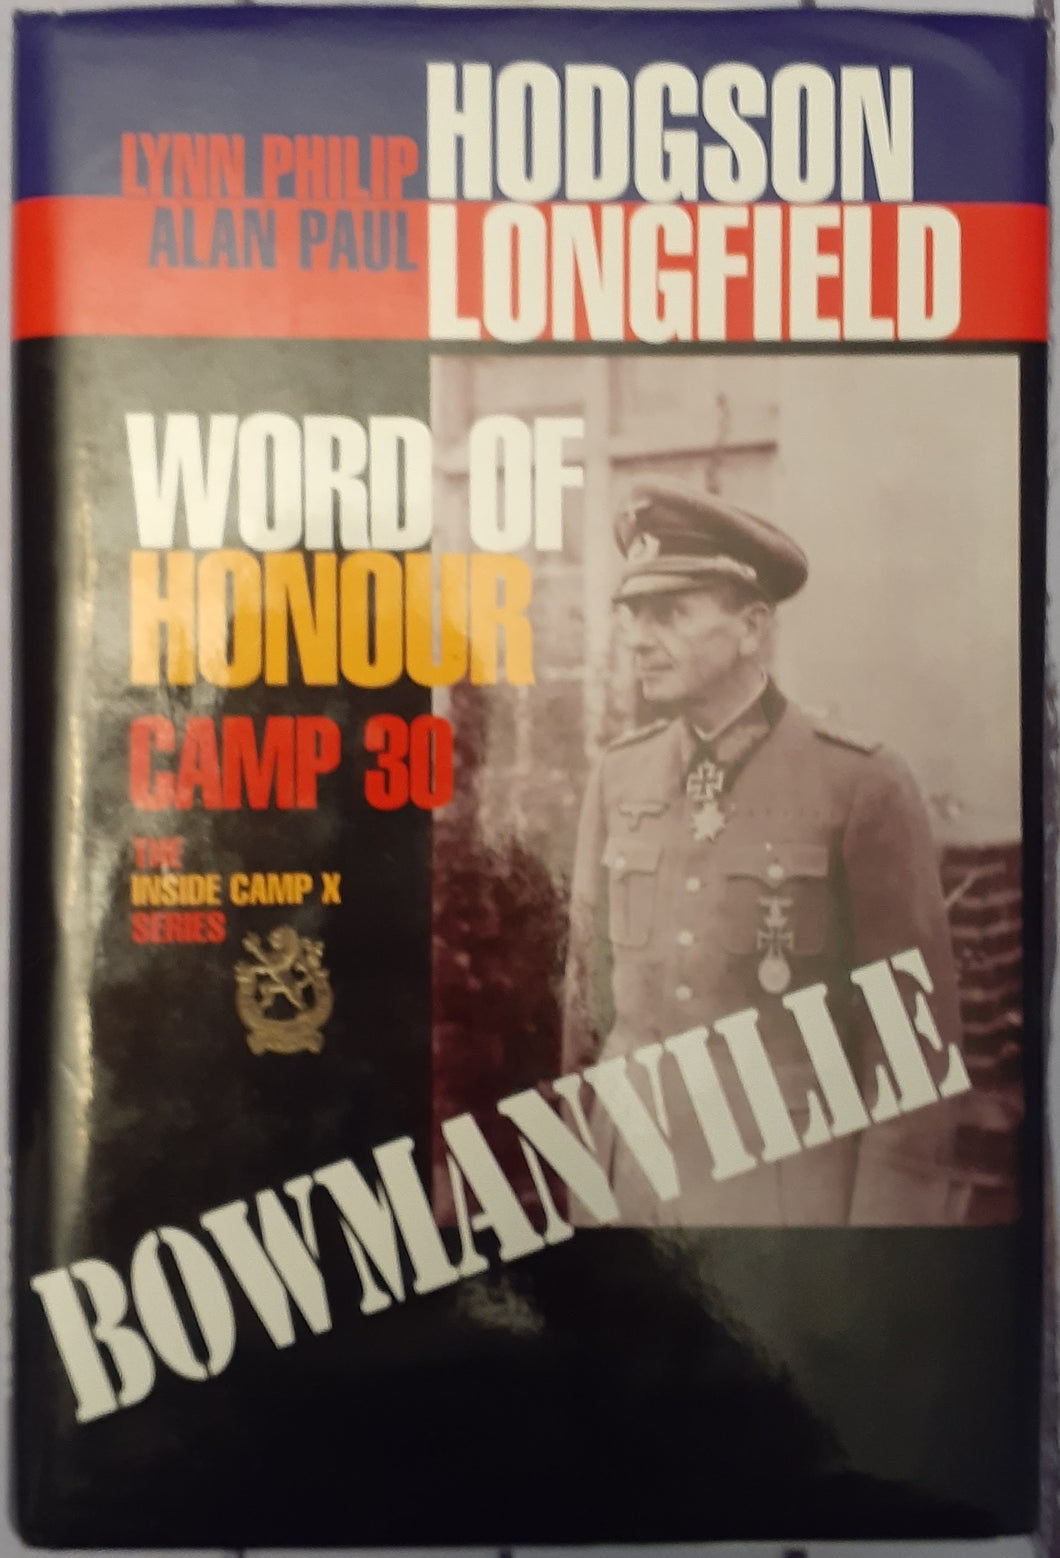 Word of Honour Camp 30 - The Inside Camp X Series